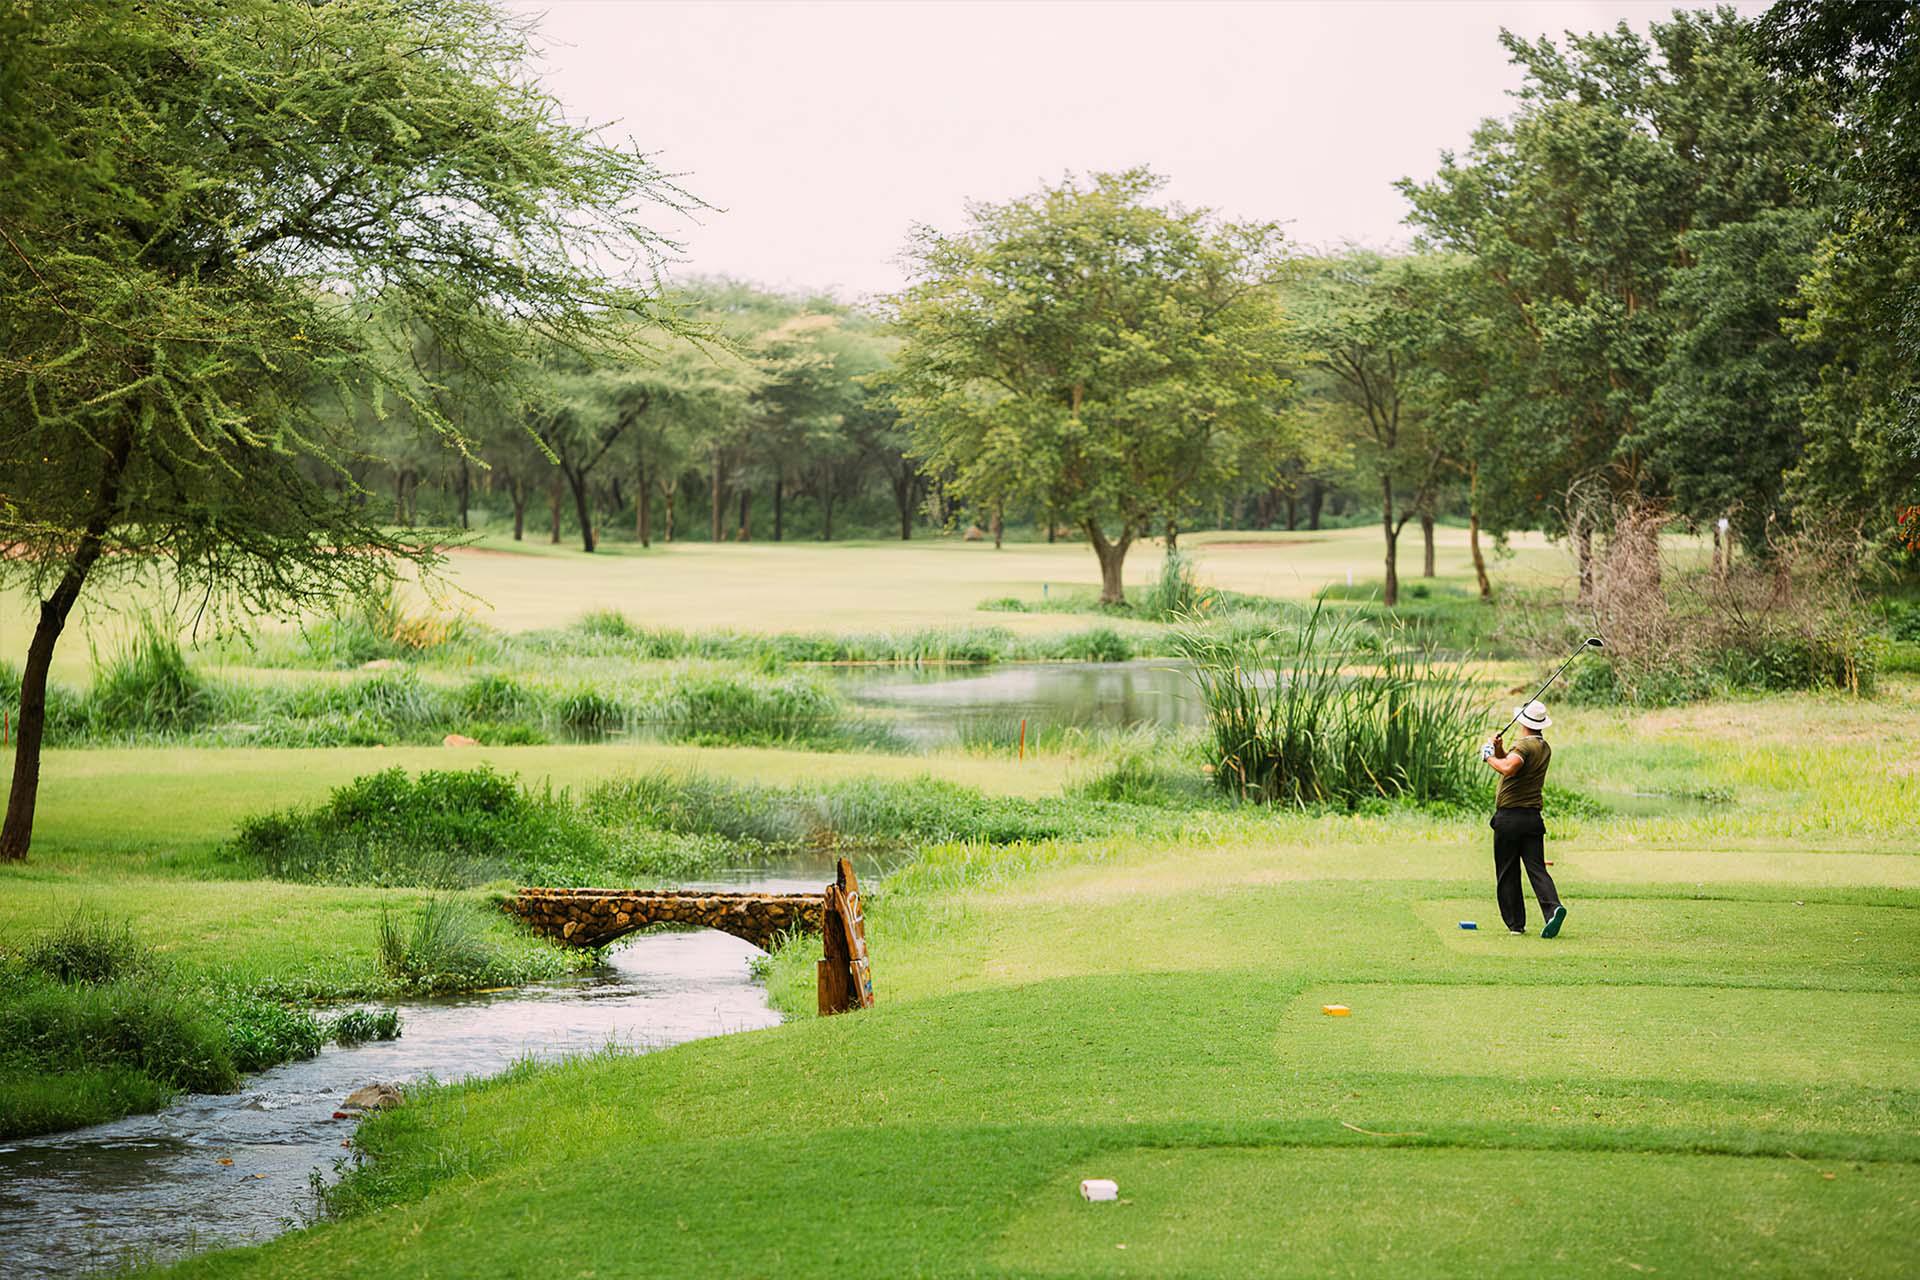 Kilimanjaro Golf is busy preparing for the upcoming ‘Challenge Tour’ in early April. 